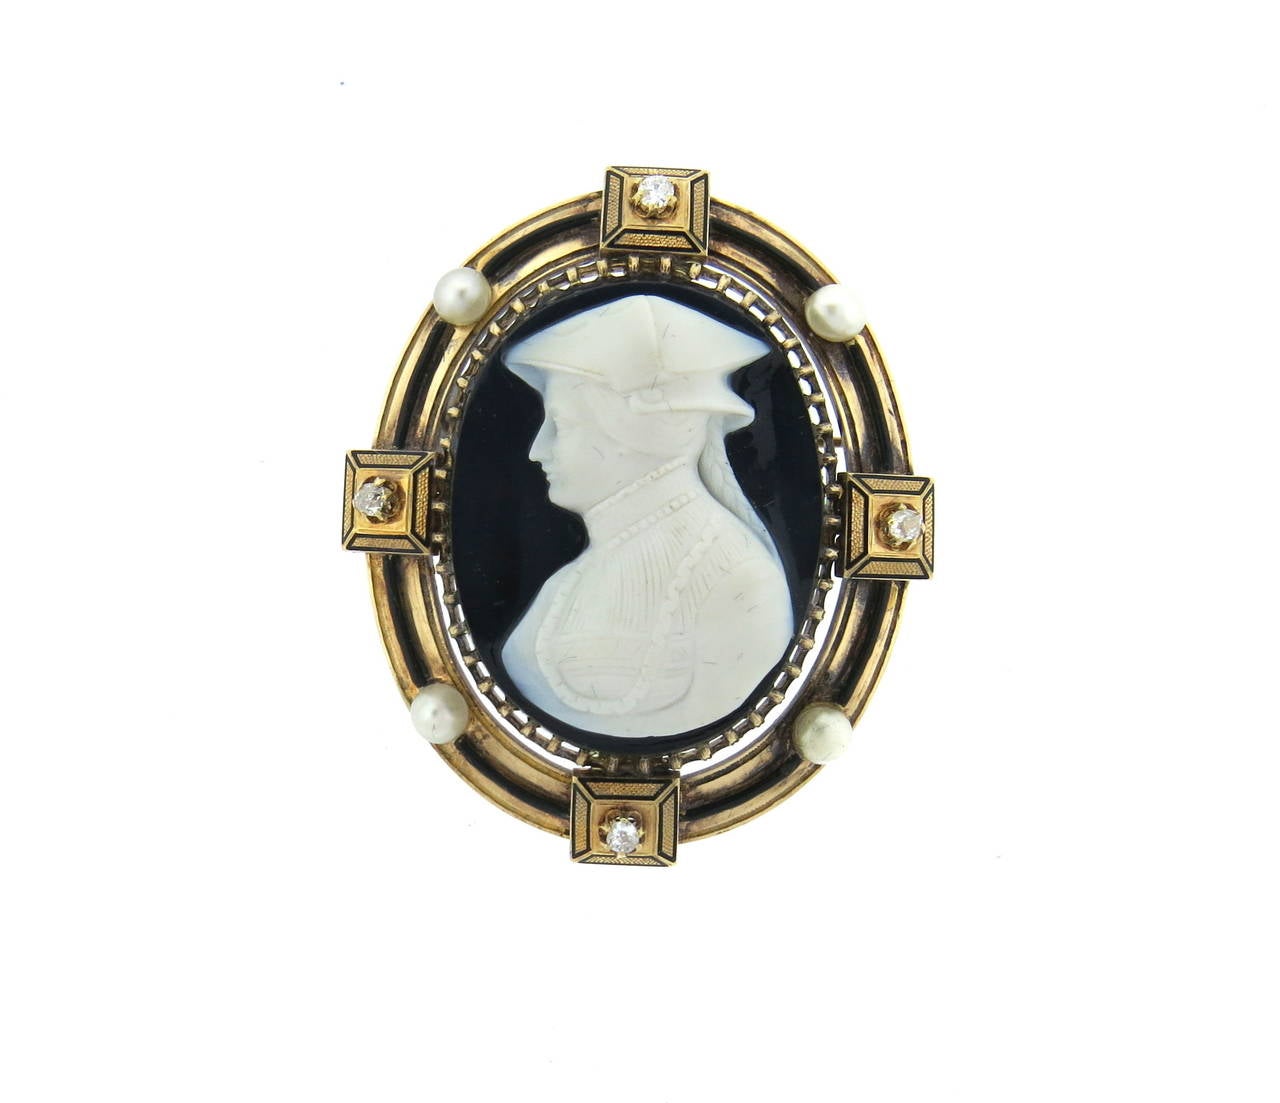 Antique 14k gold brooch, featuring hardstone cameo, adorned with four diamonds and 4.3mm natural pearls. Brooch measures 53mm x 45mm. Weight of the piece - 27.9 grams